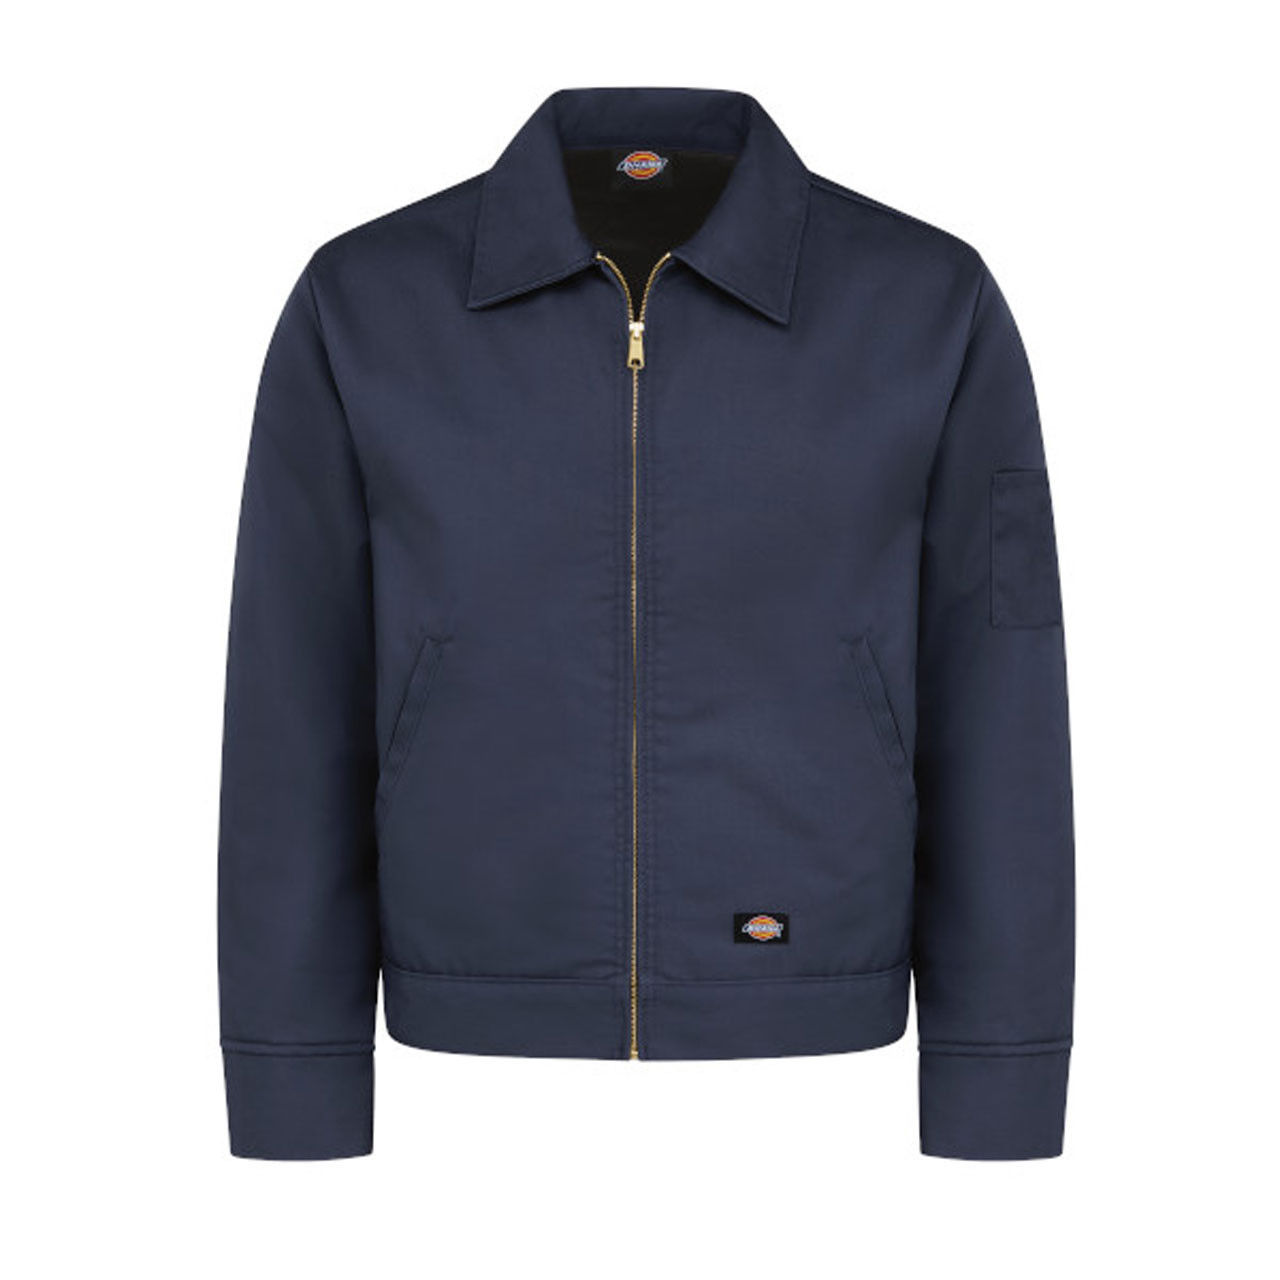 Is the Dickies Eisenhower Jacket imported?